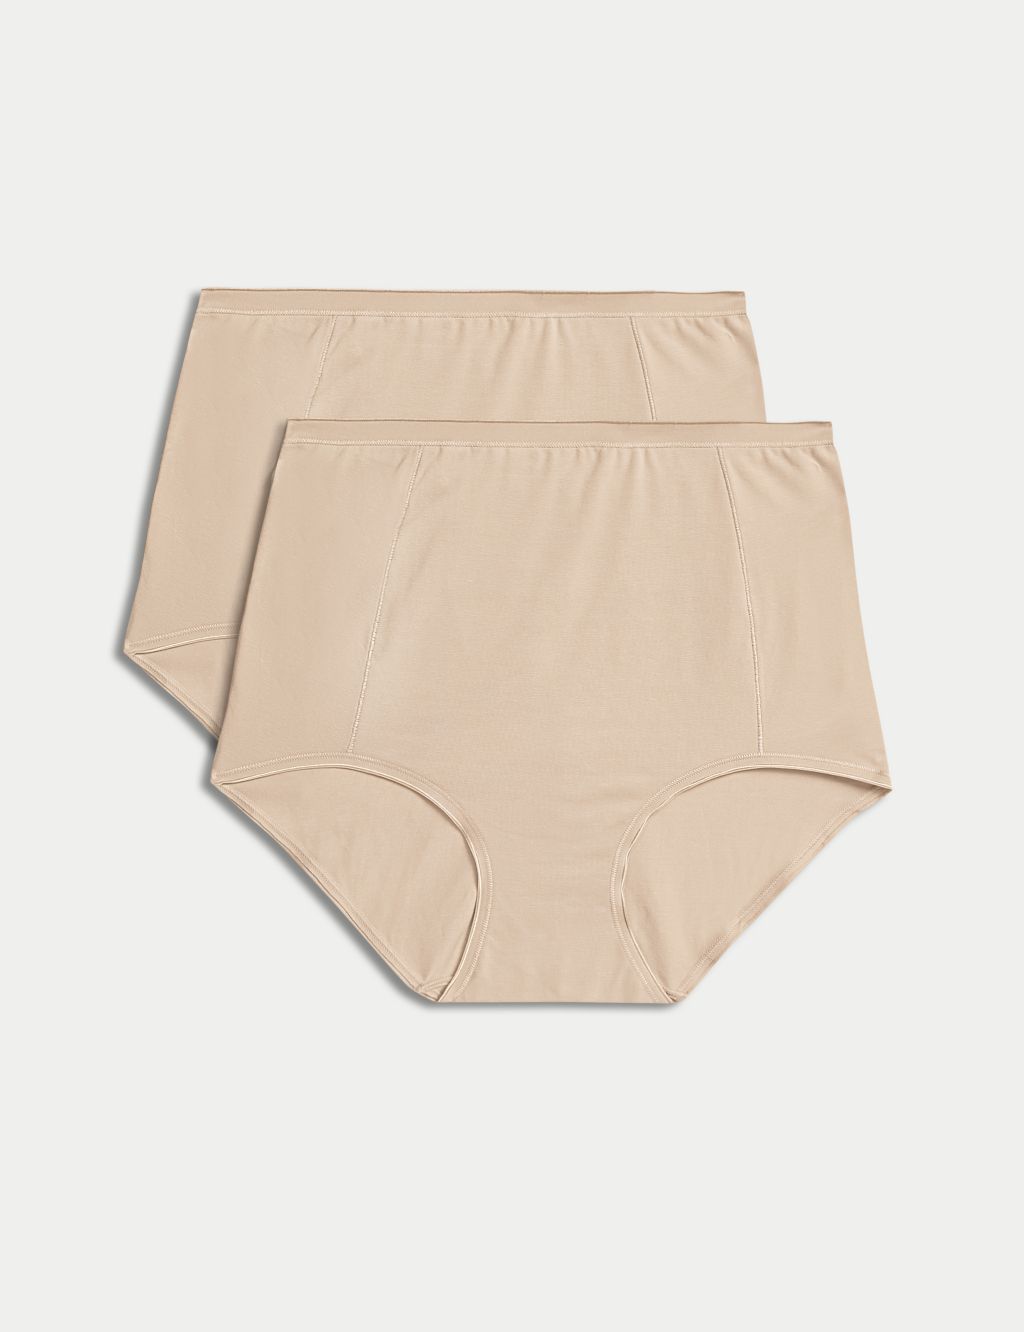 Buy Marks & Spencer Firm Control Full Briefs - Nude (Pack of 2) online